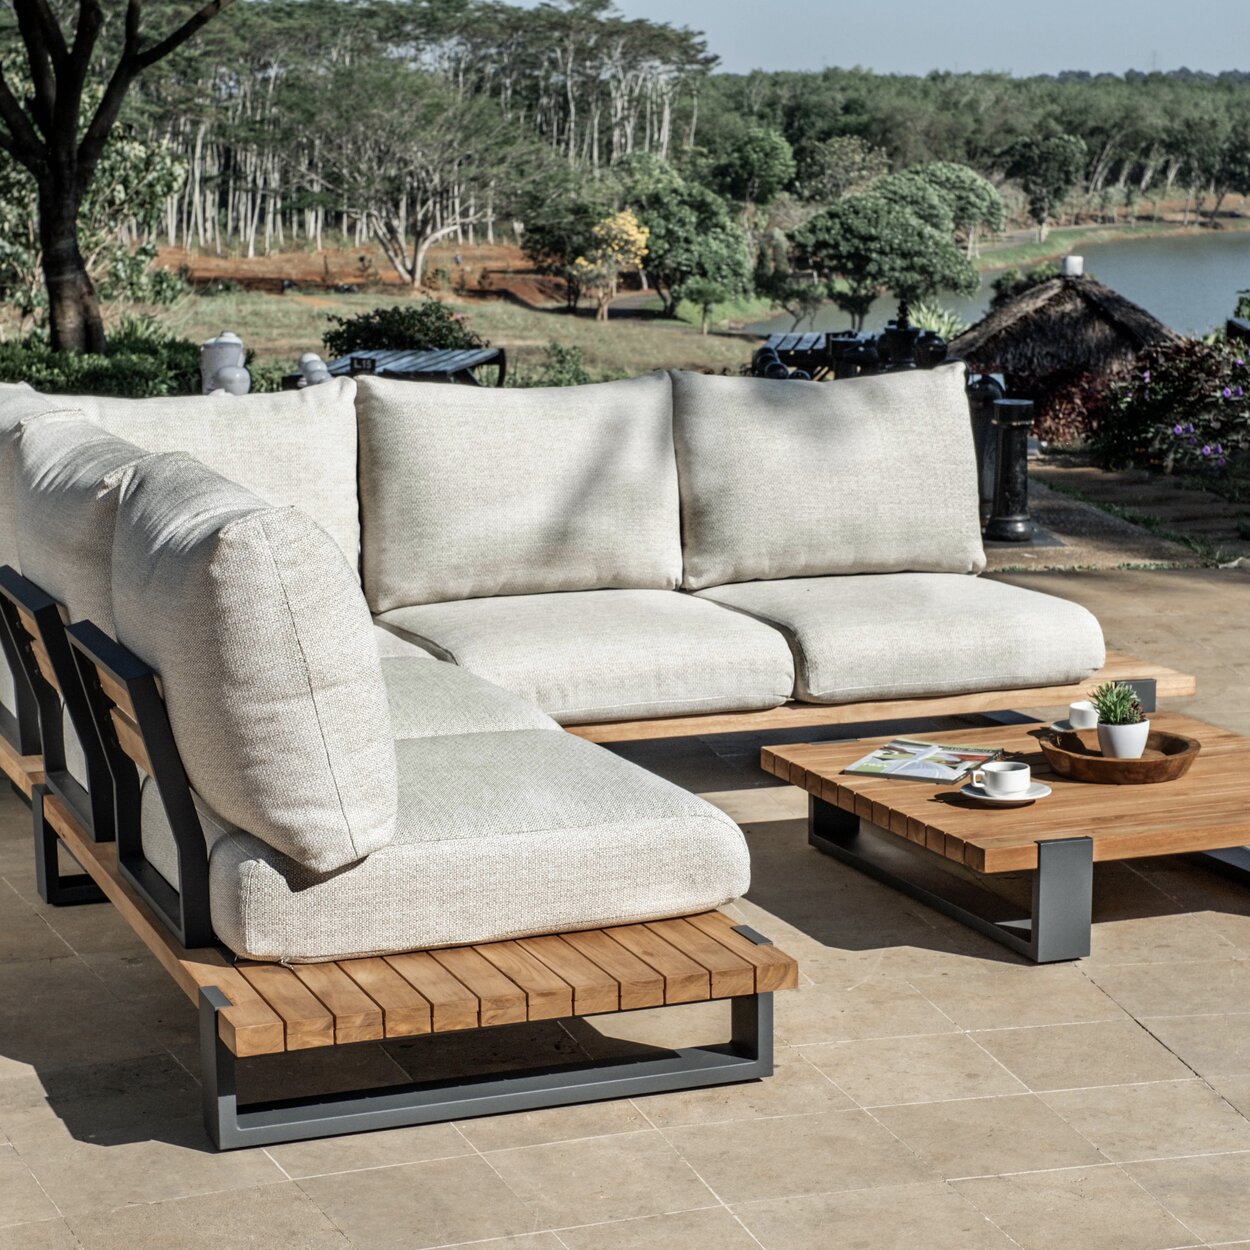 Modular Outdoor lounge setting from s2dio available at Eden Living showroom in Capalaba, Brisbane